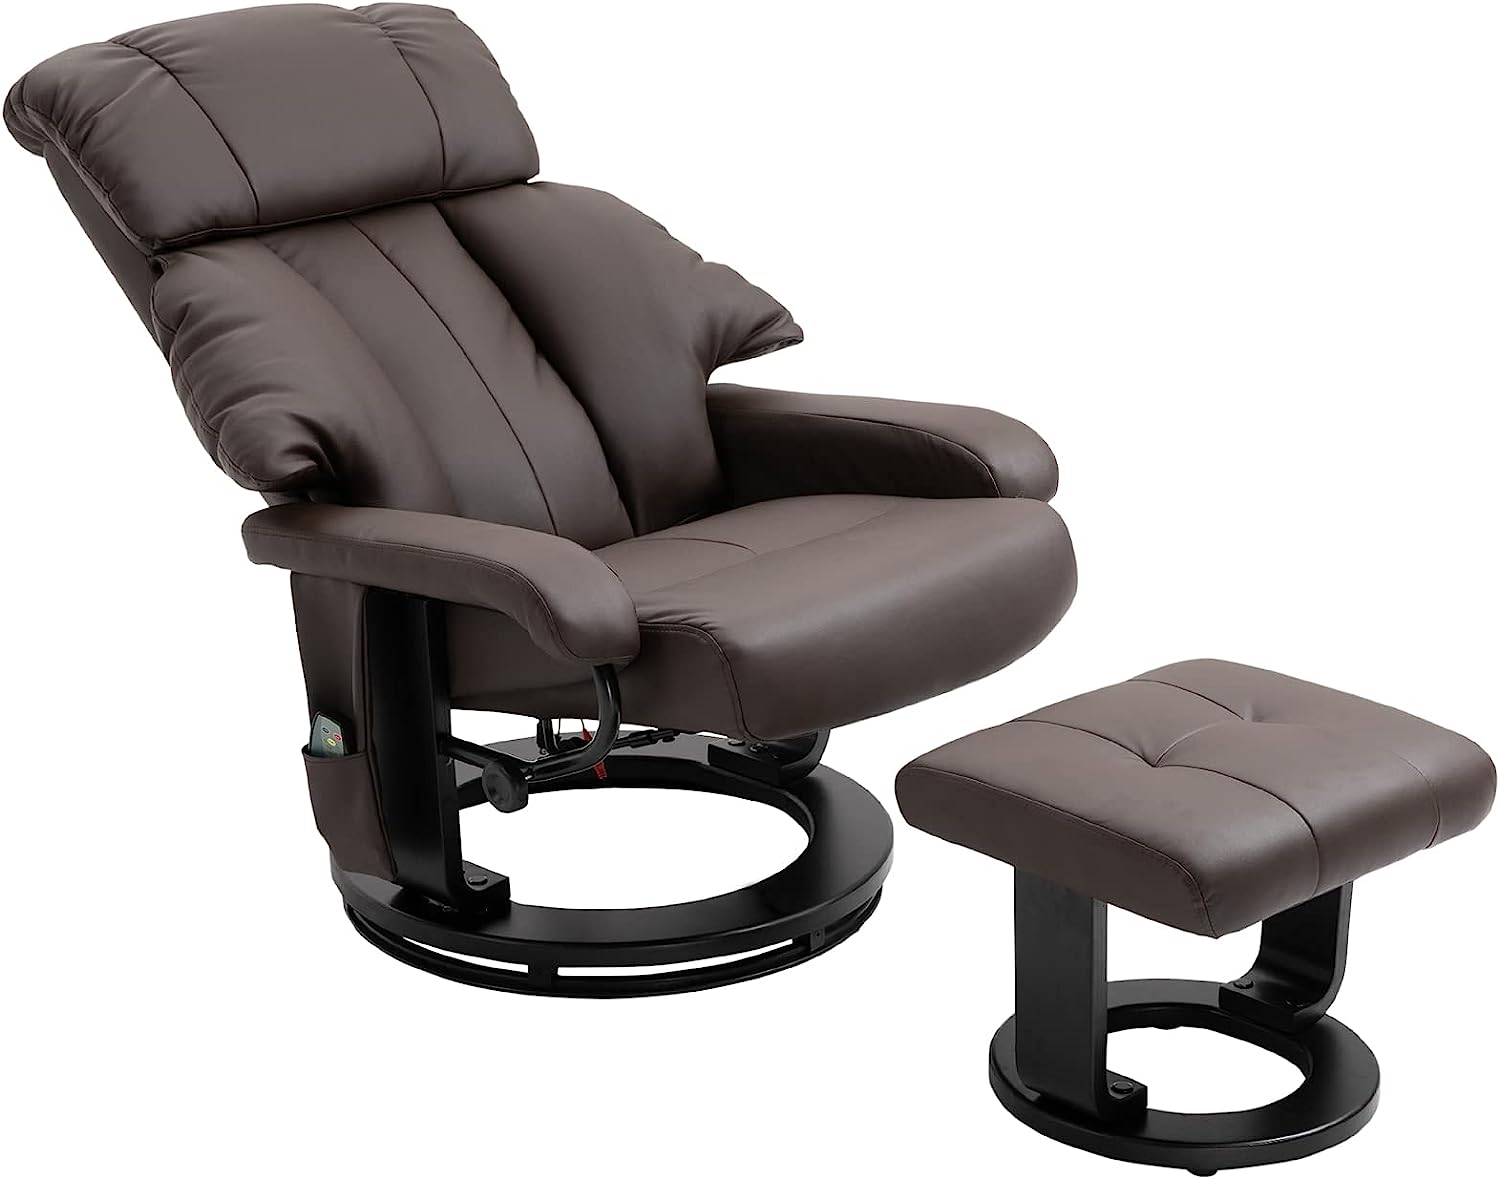 HOMCOM Recliner with Ottoman Footrest, Recliner Chair [...]